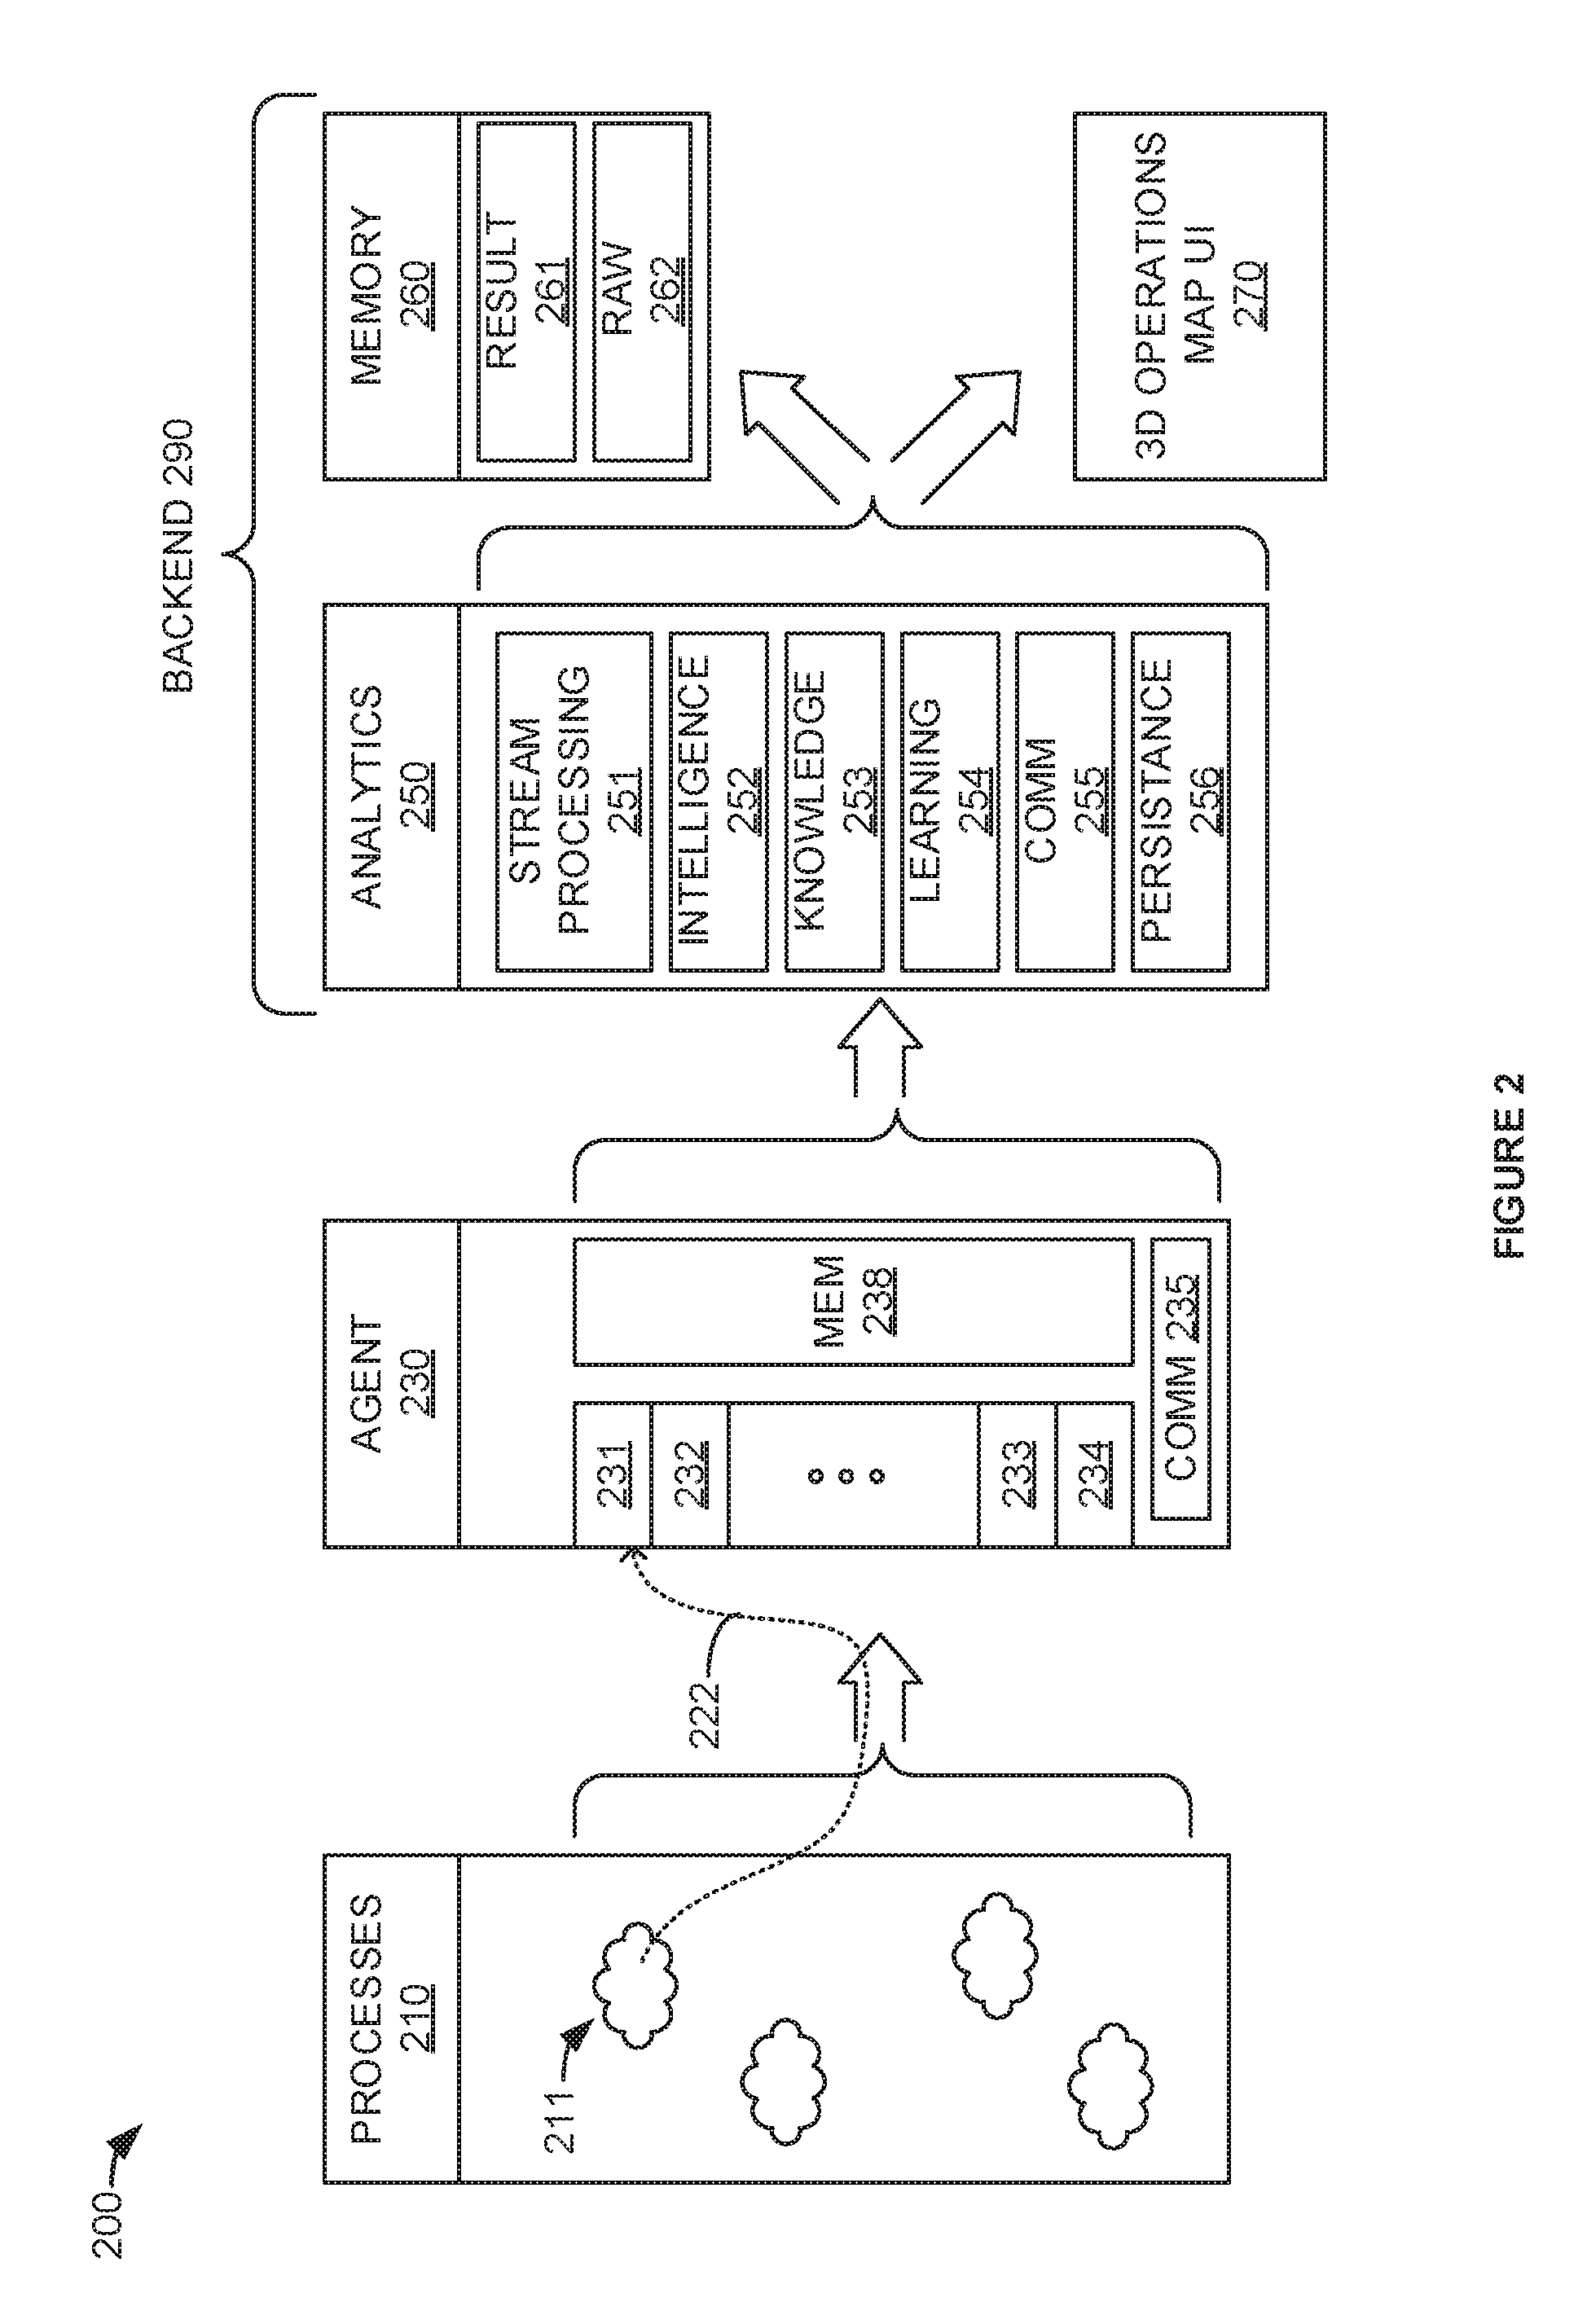 Hierarchical fault determination in an application performance management system